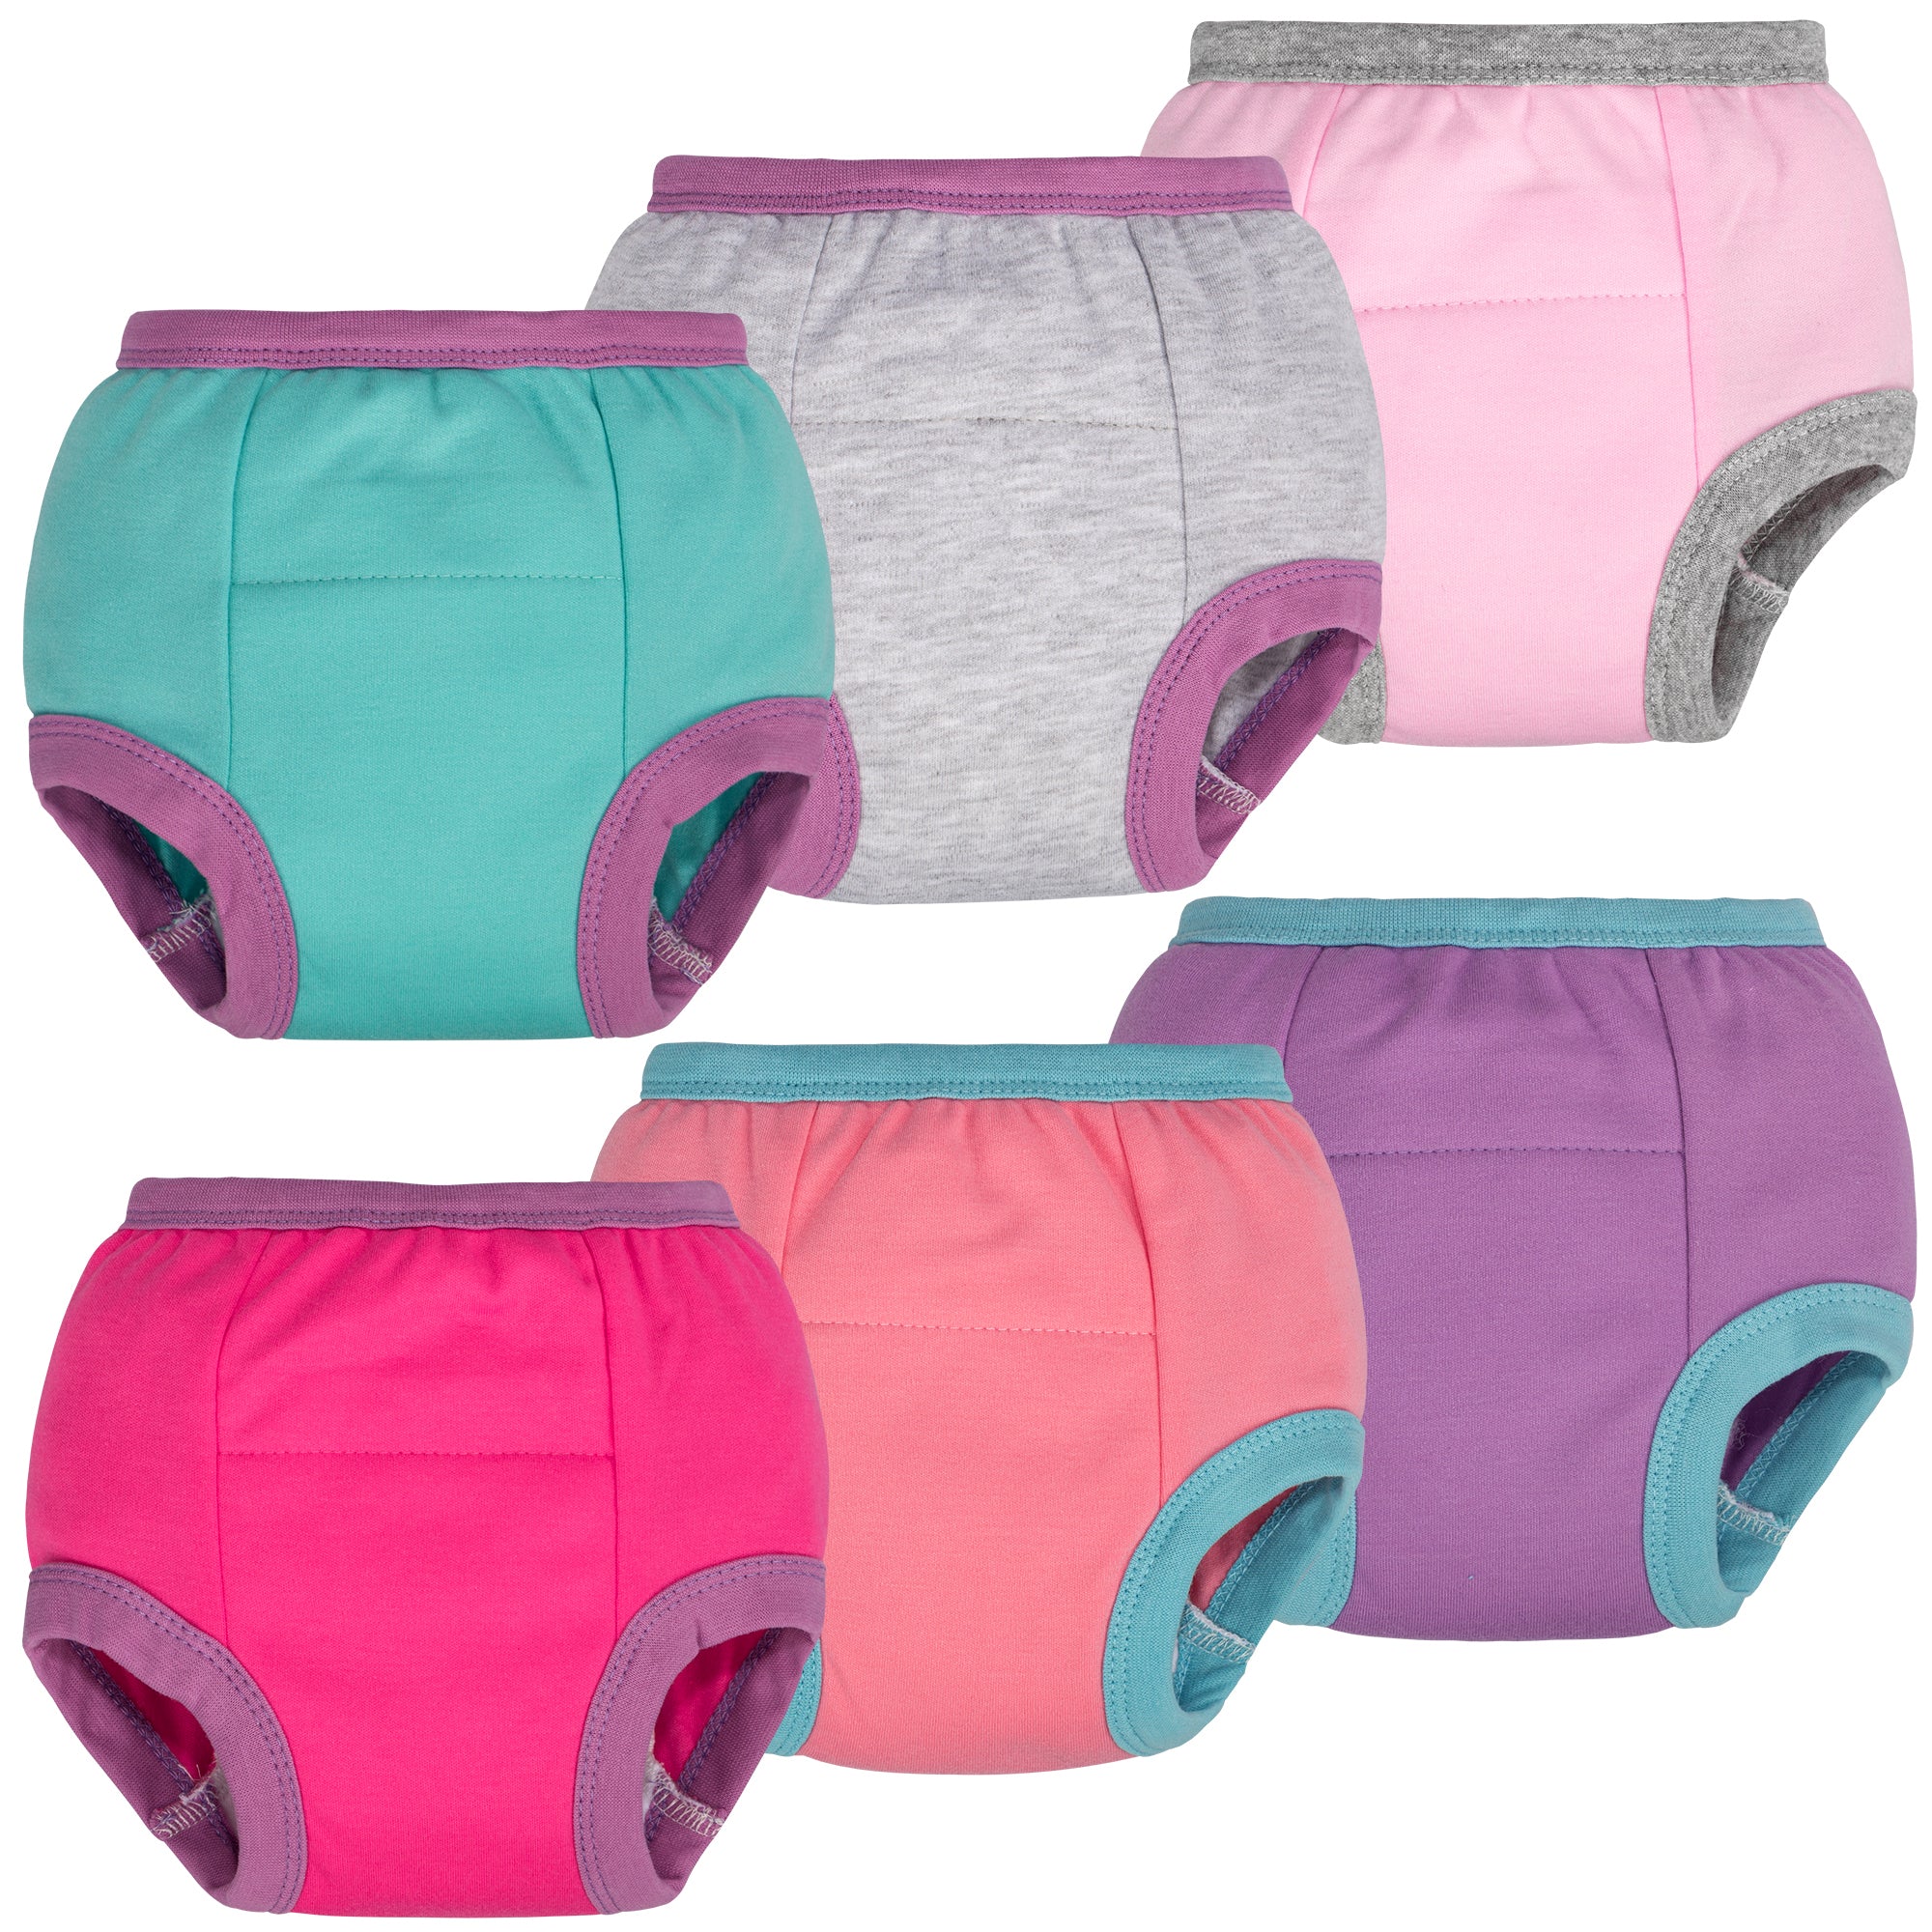 Padded Underwear (Jungle Jam) for baby by SuperBottoms